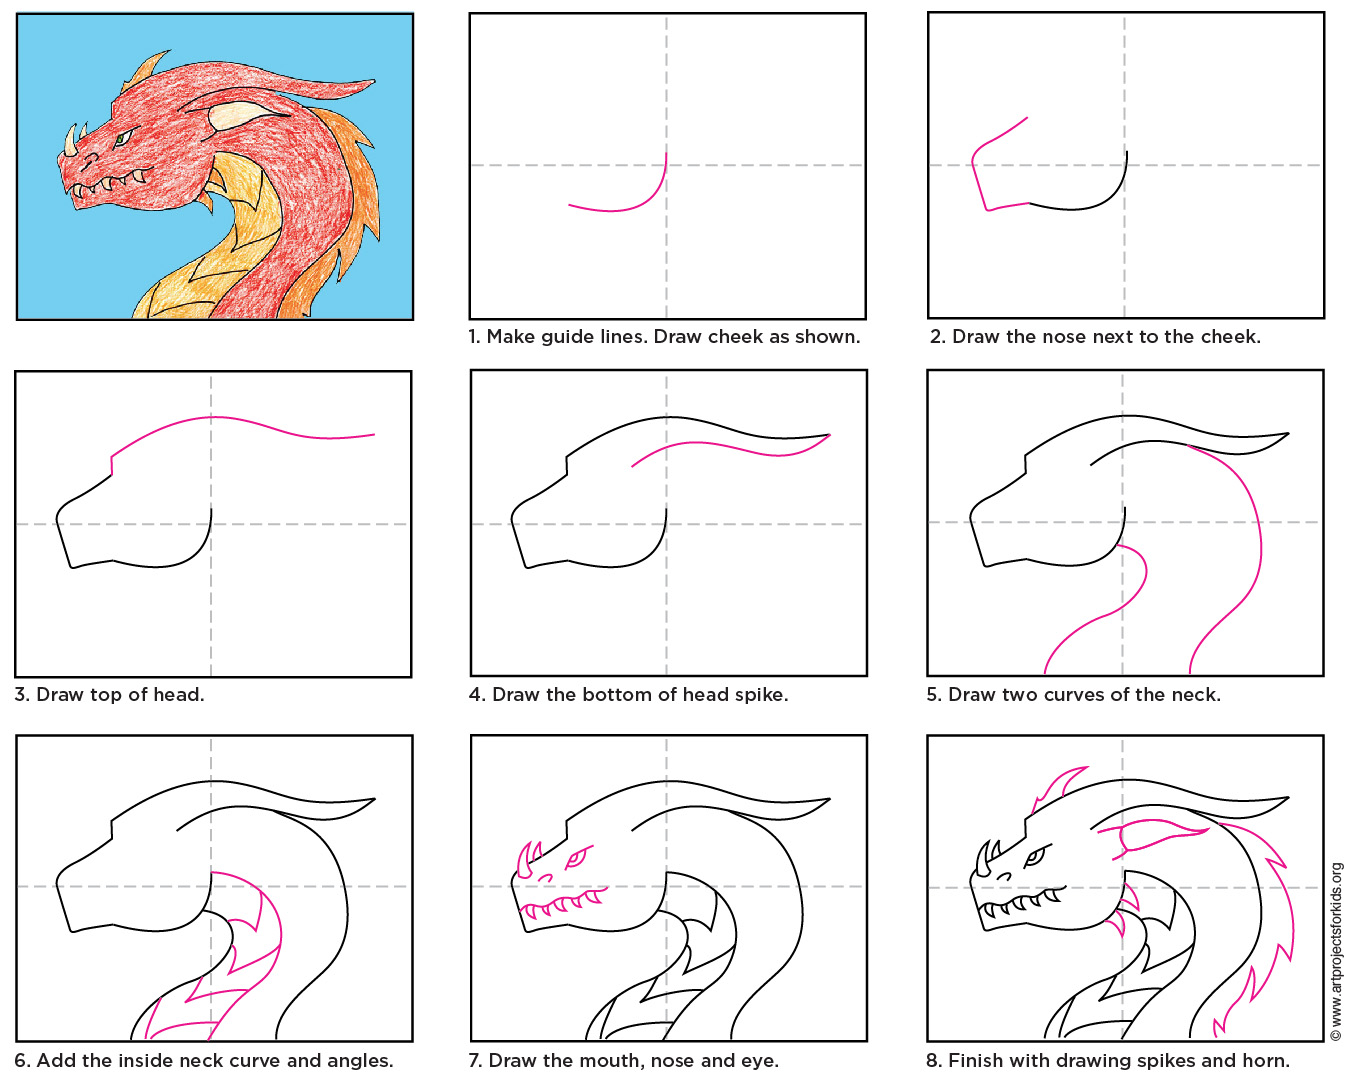 Step by step guide on how to draw a dragon’s head